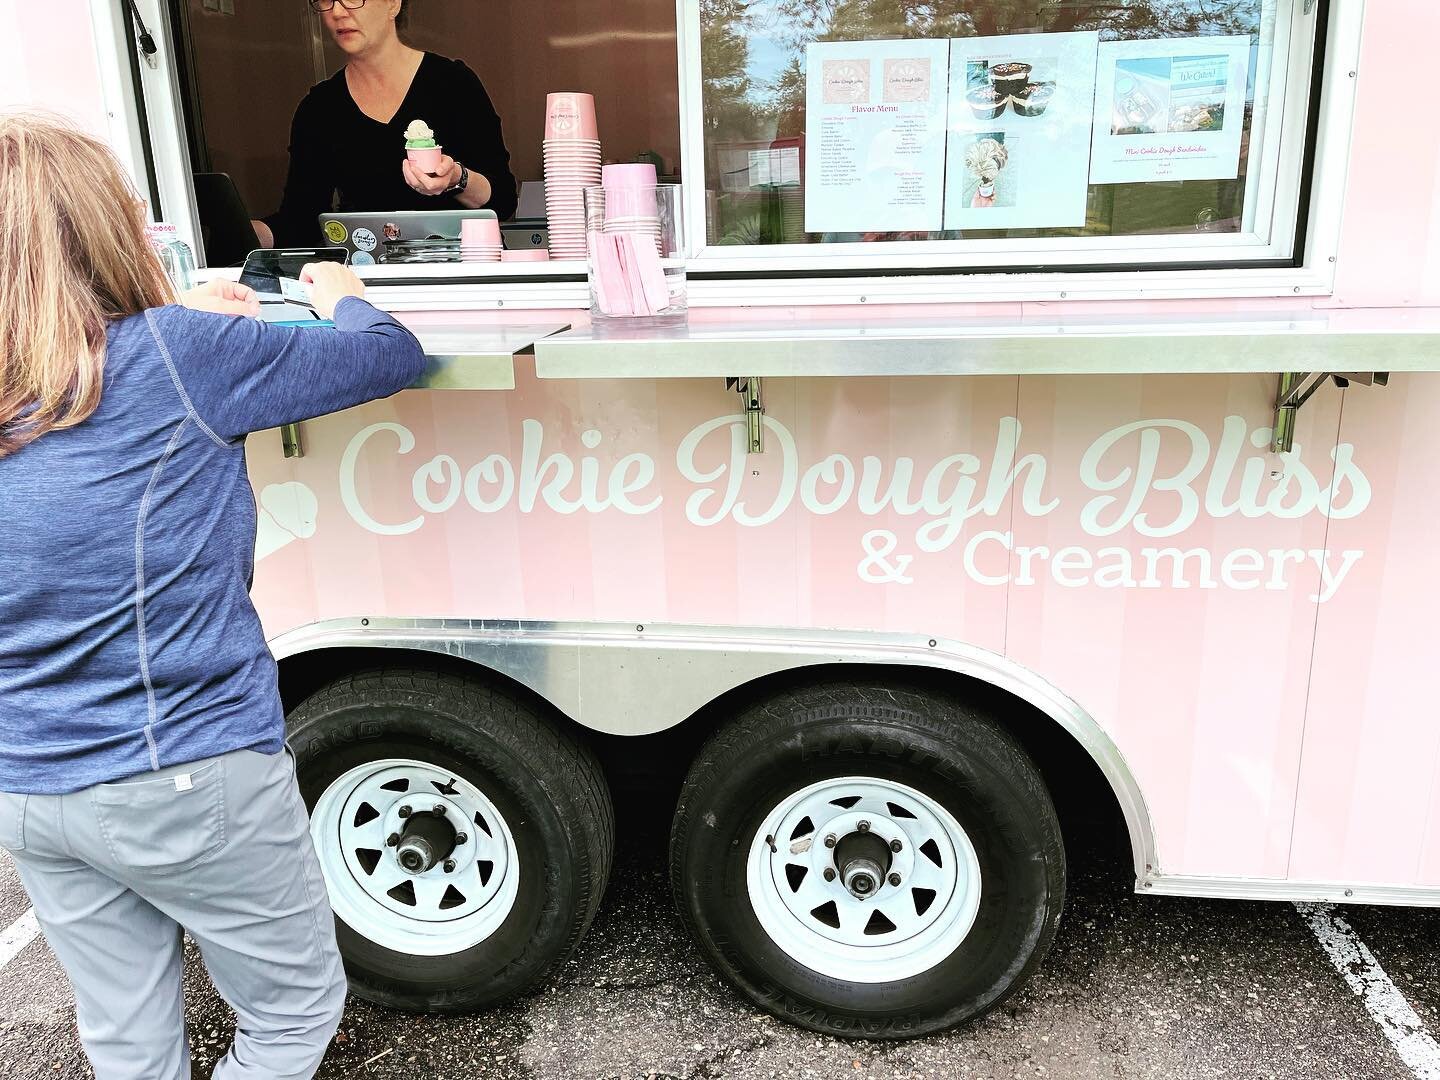 Cookie Dough Bliss was at the Hyland Greens Community Event today. They cater weddings &amp; events with delicious ice cream. We are partial to mint chocolate chip Ice cream! 🍨